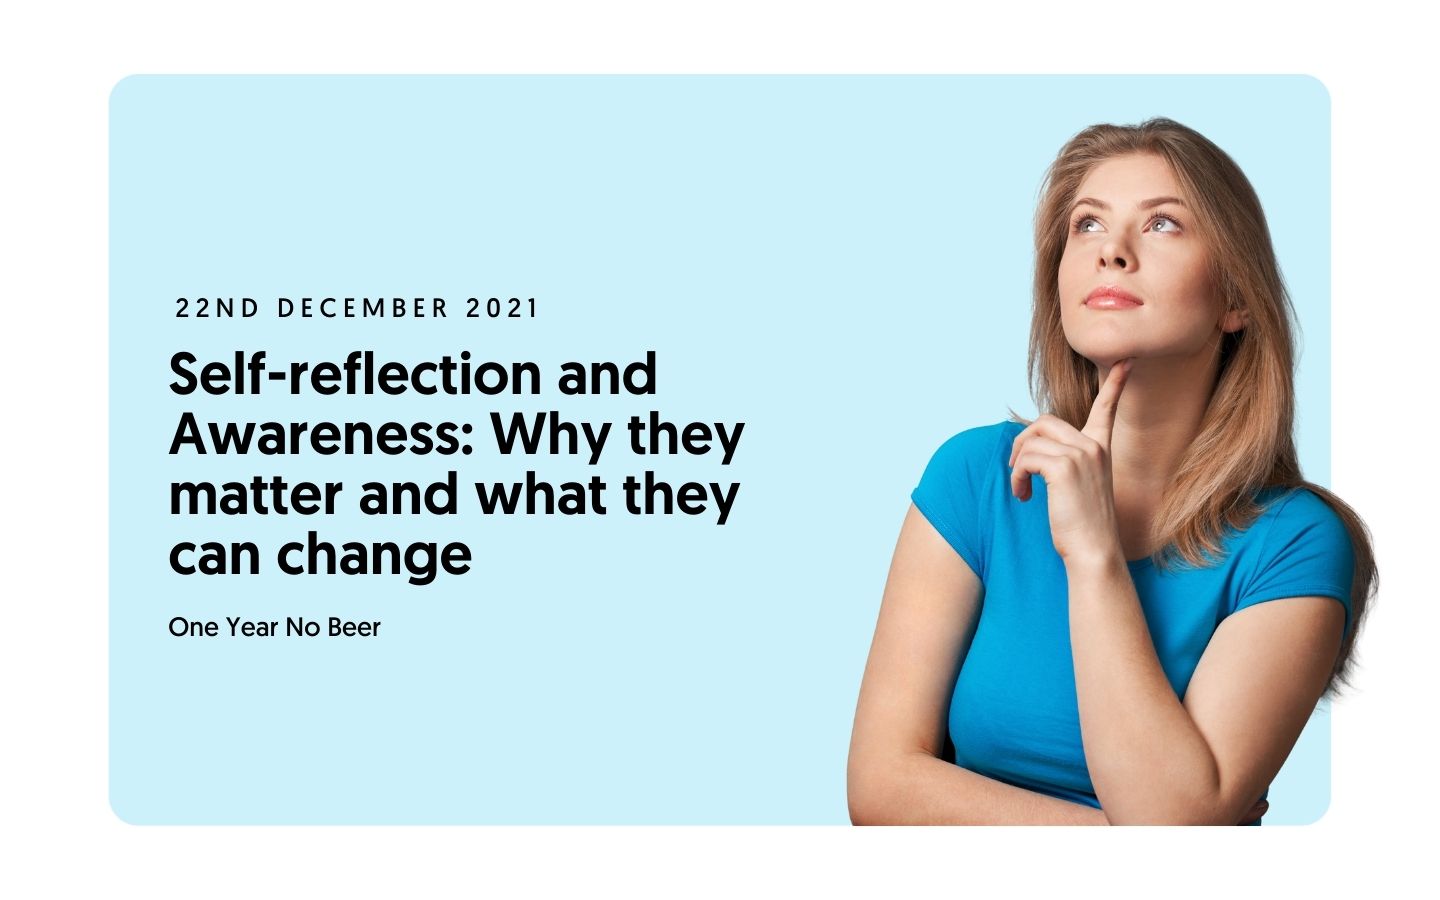 Self-reflection and Awareness: Why they matter and what they can change